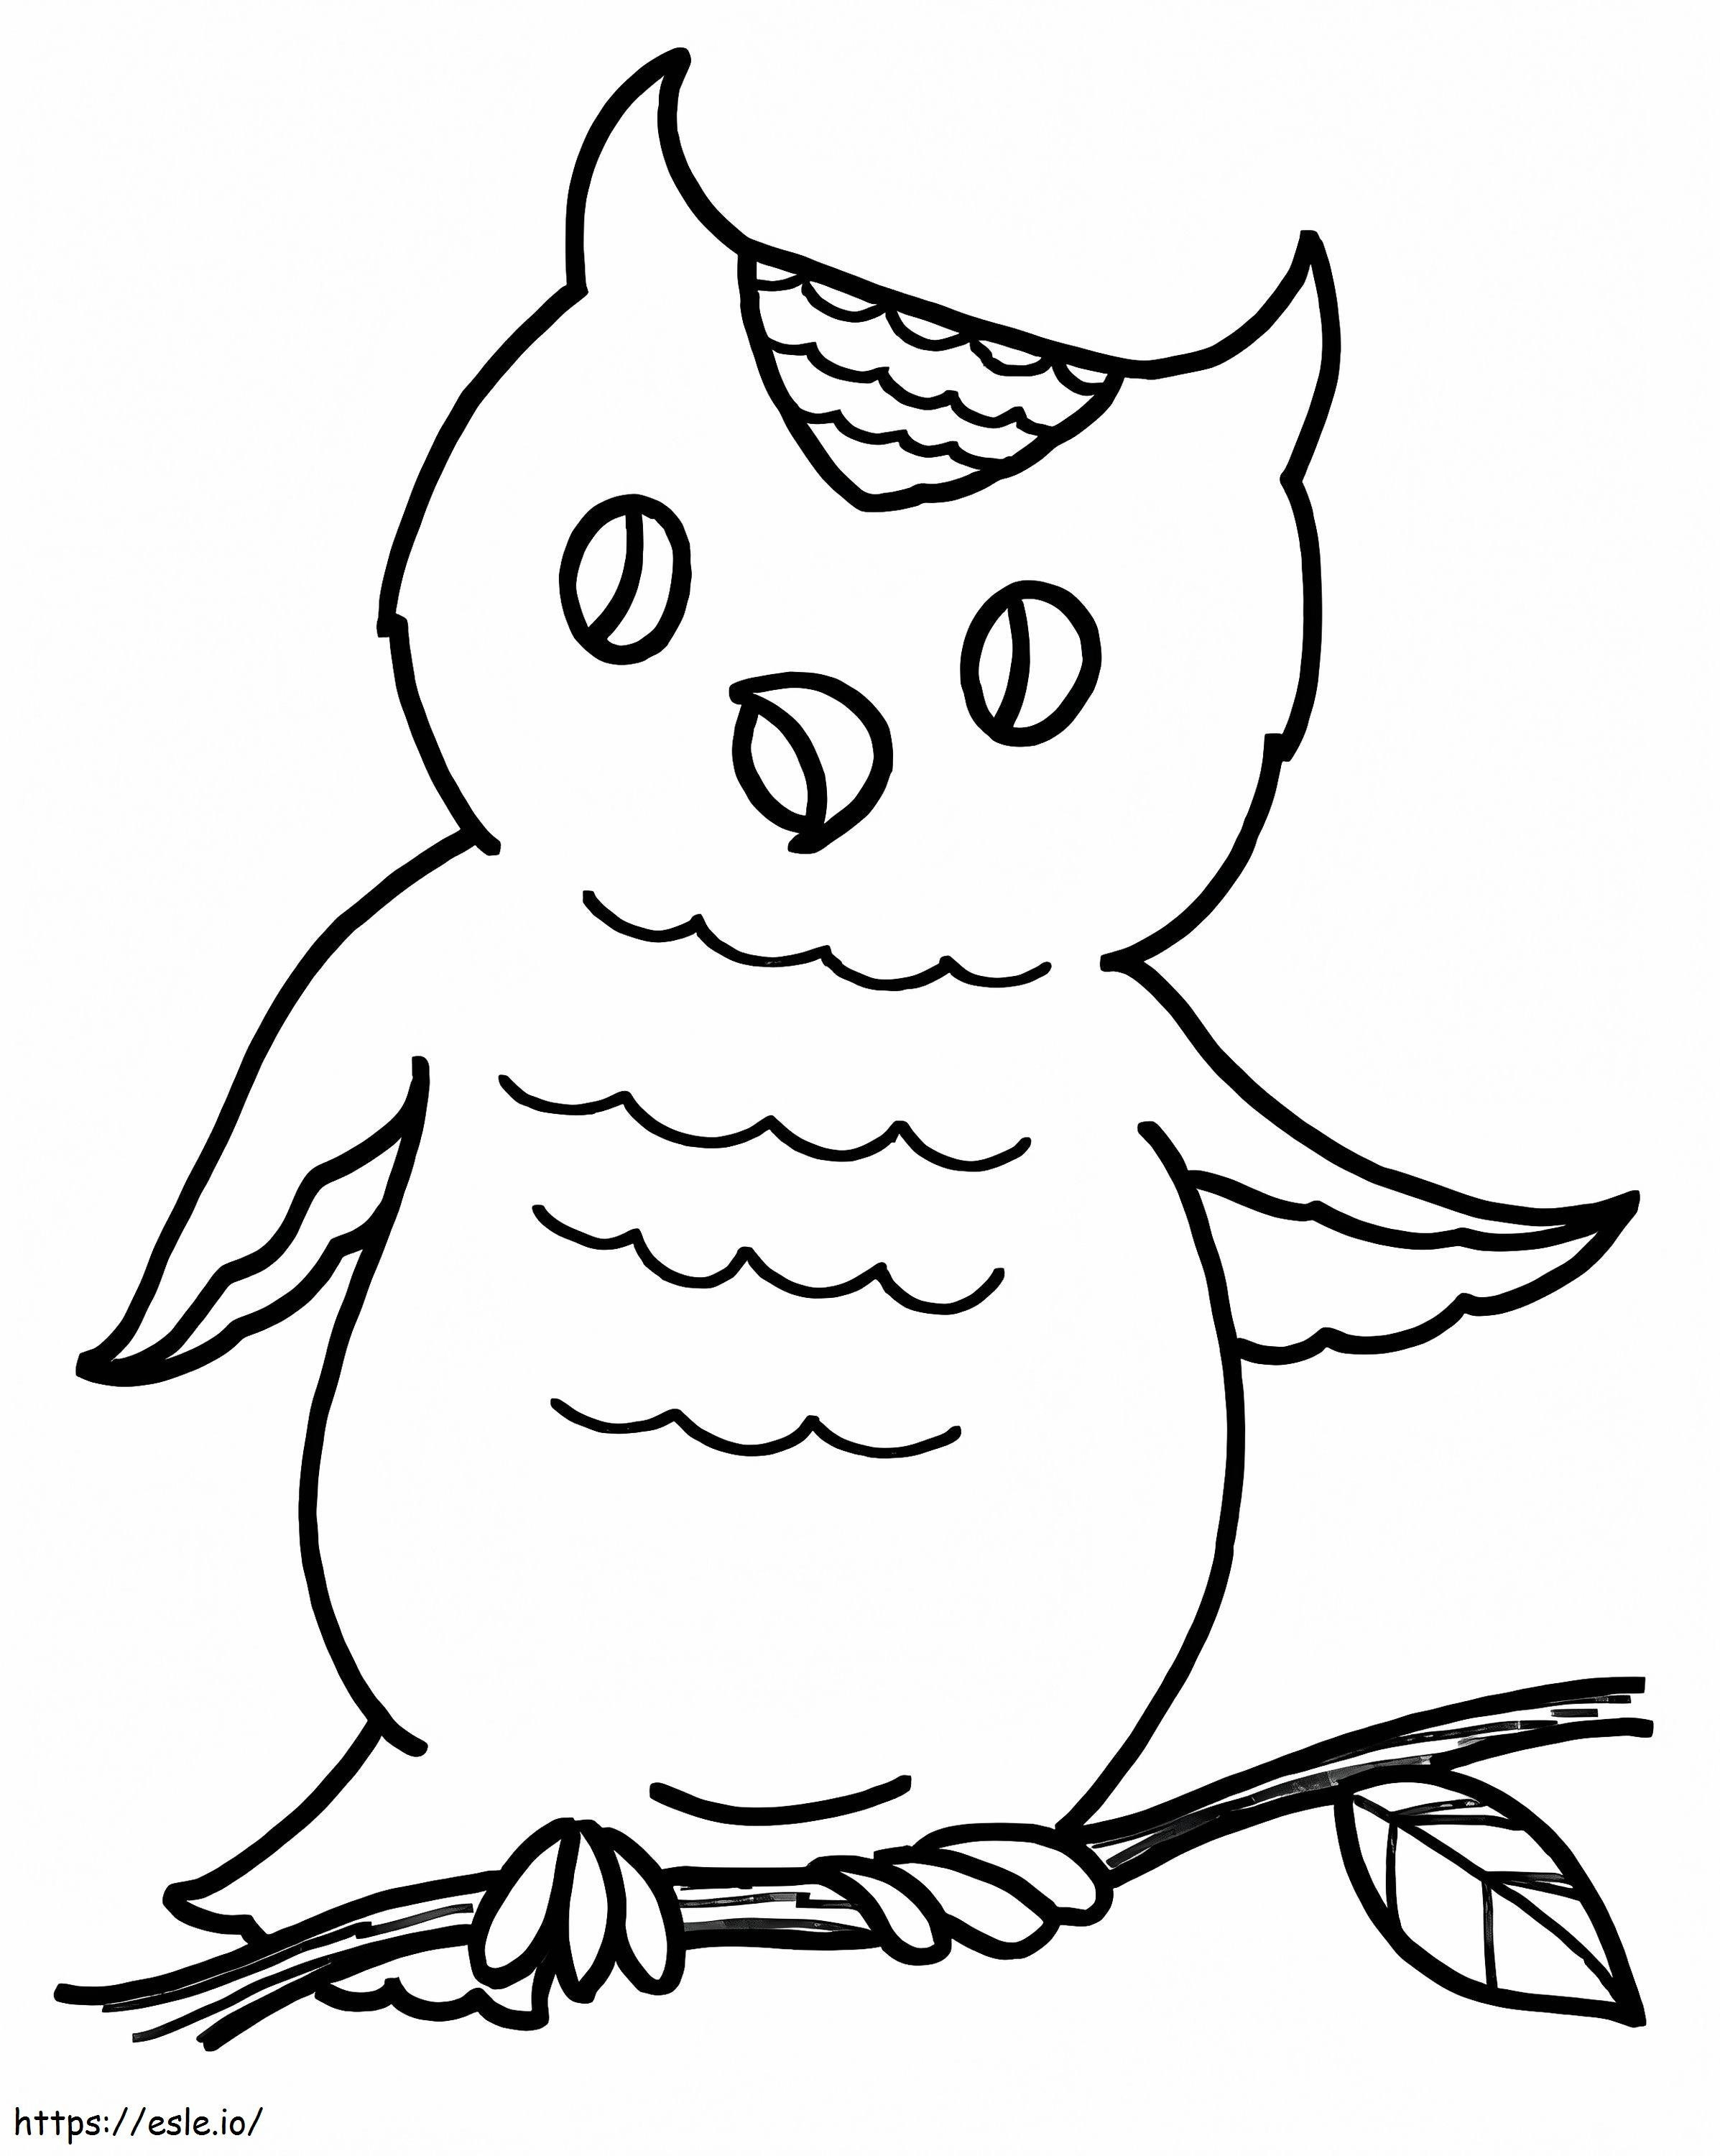 Simple Owl coloring page